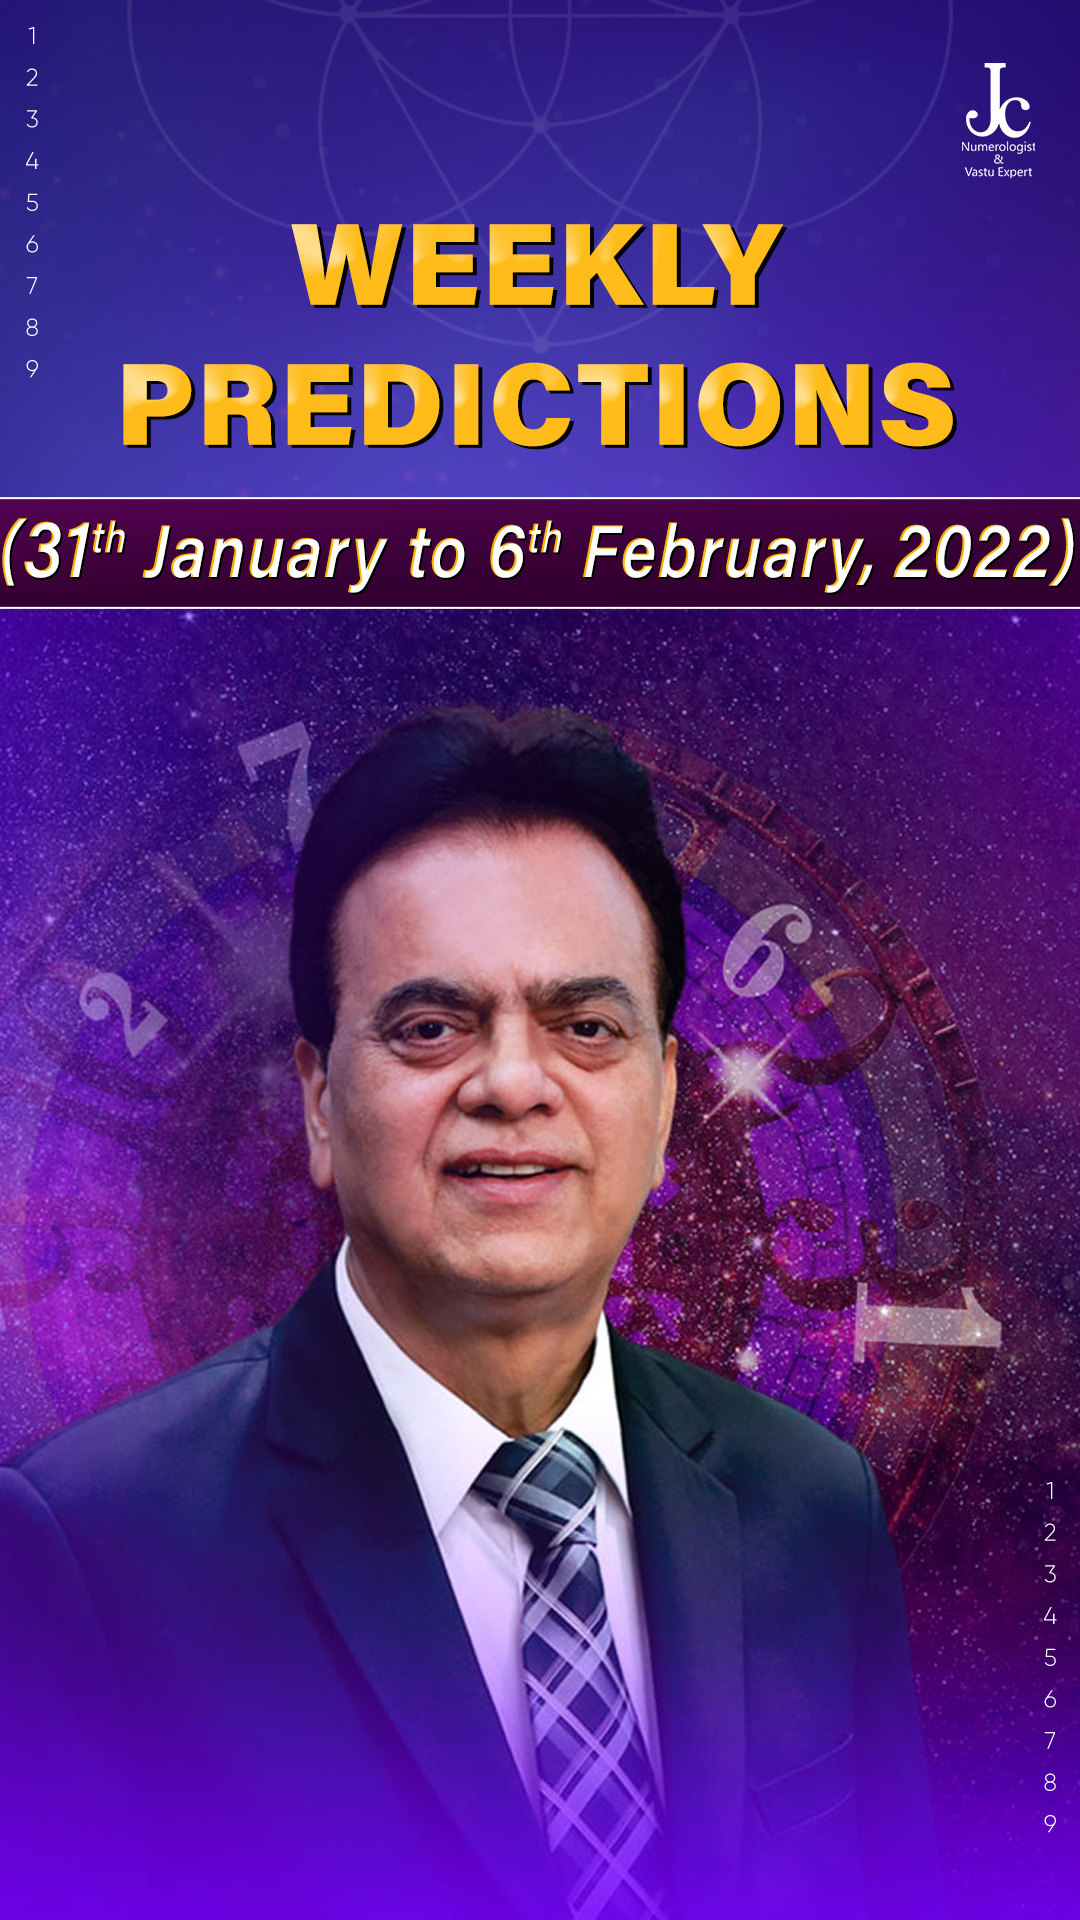 January 31 to 6 February numerology prediction by J C Chaudhry